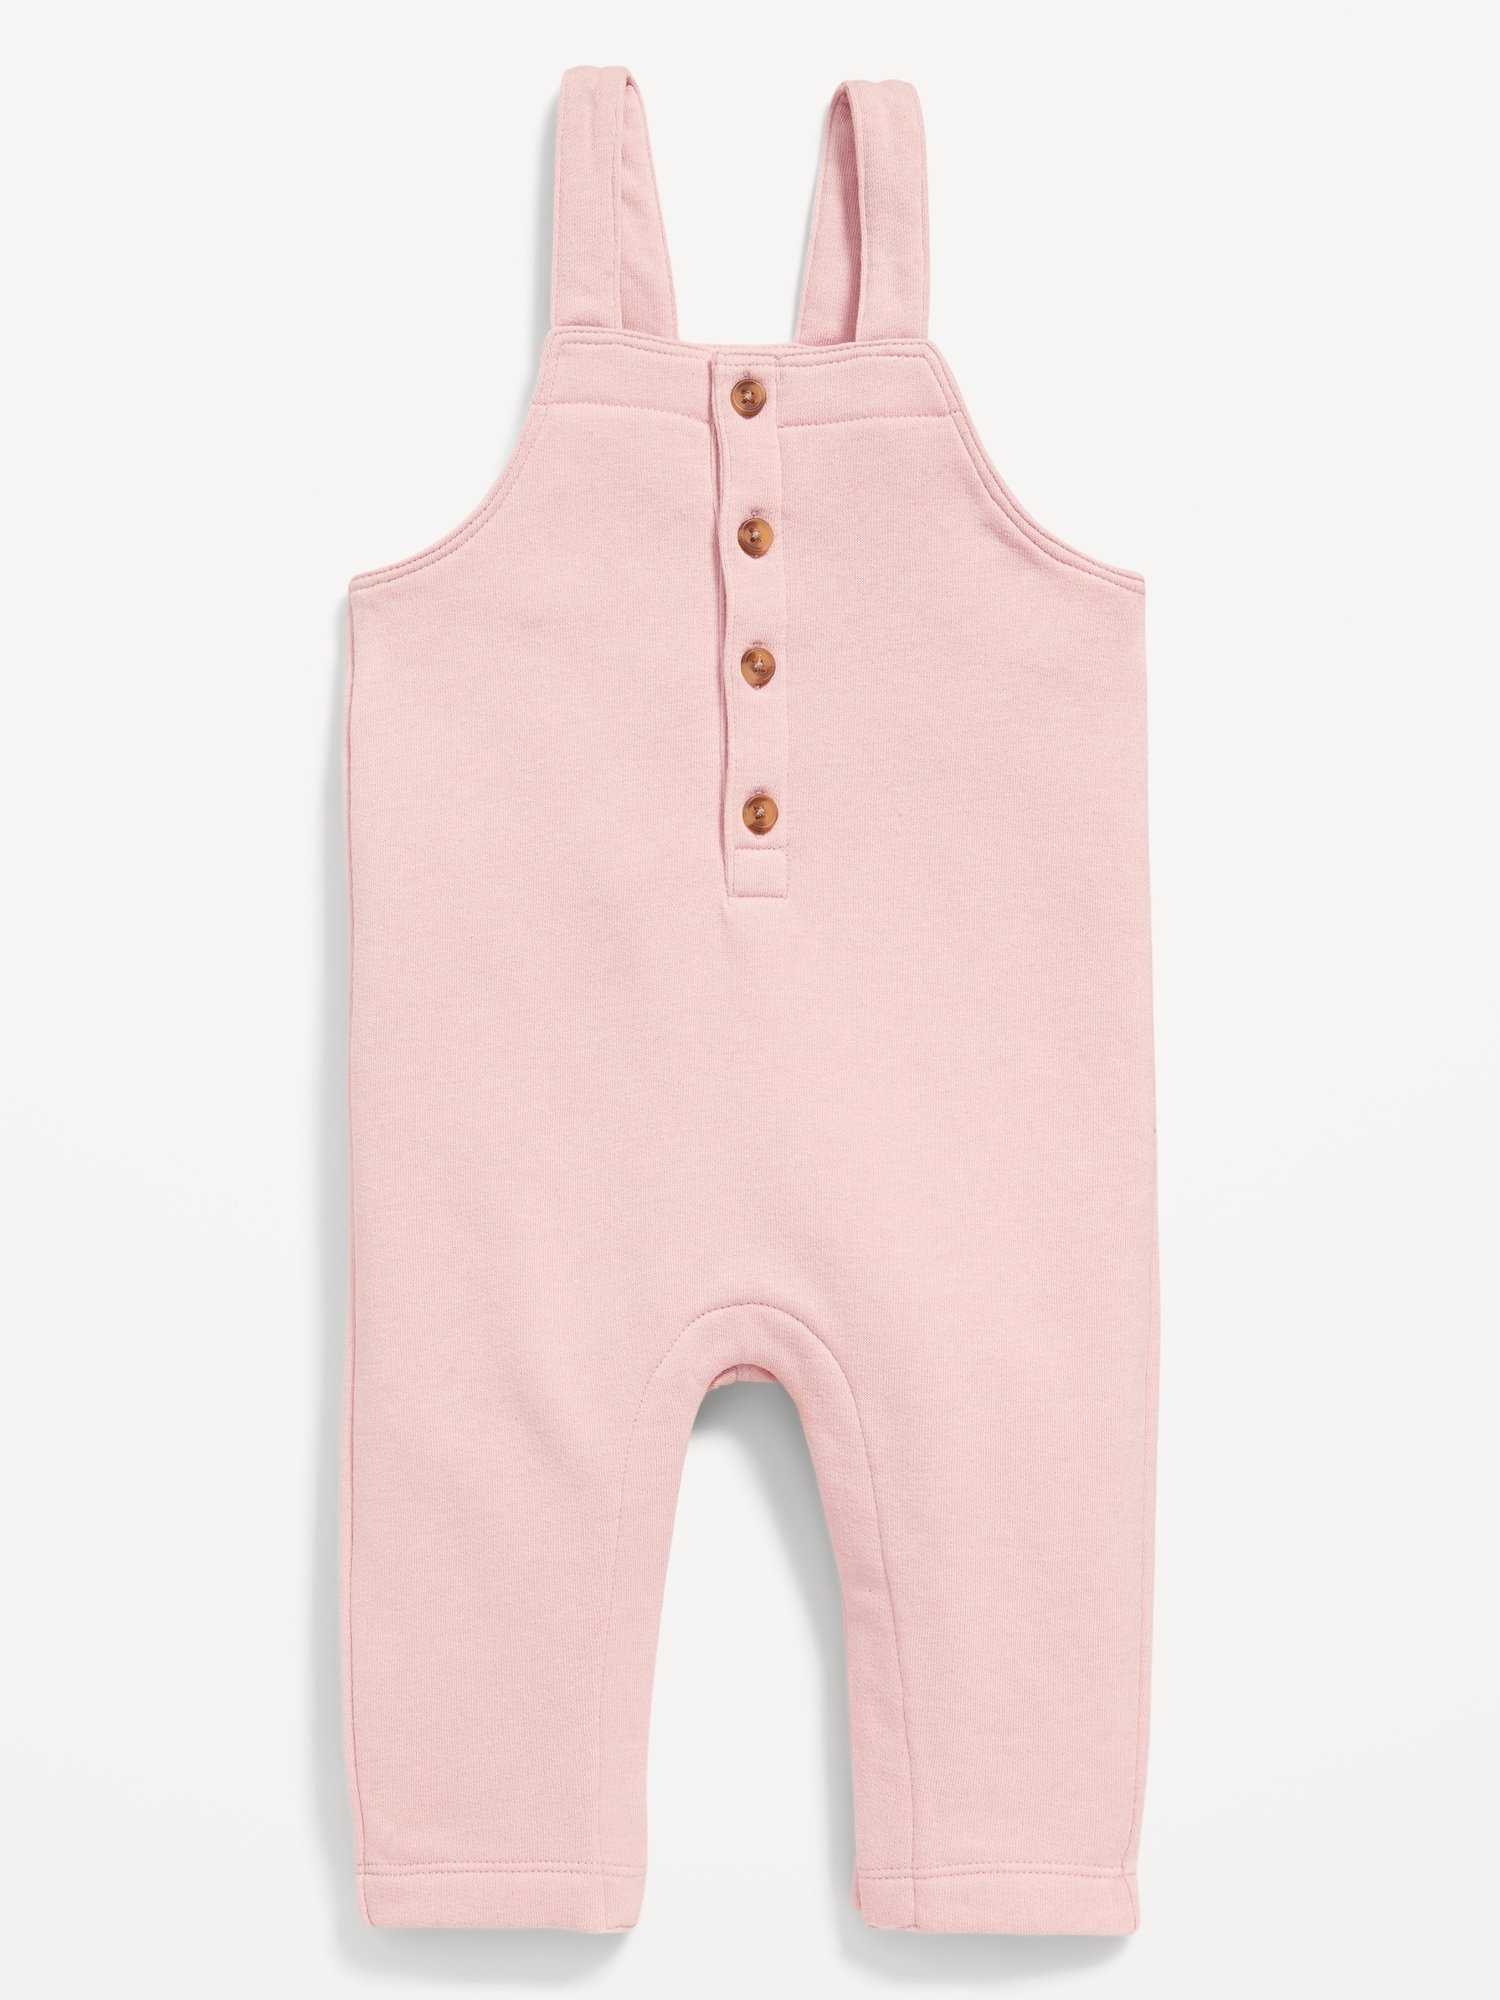 Unisex Sleeveless Button-Front Overalls for Baby | Old Navy